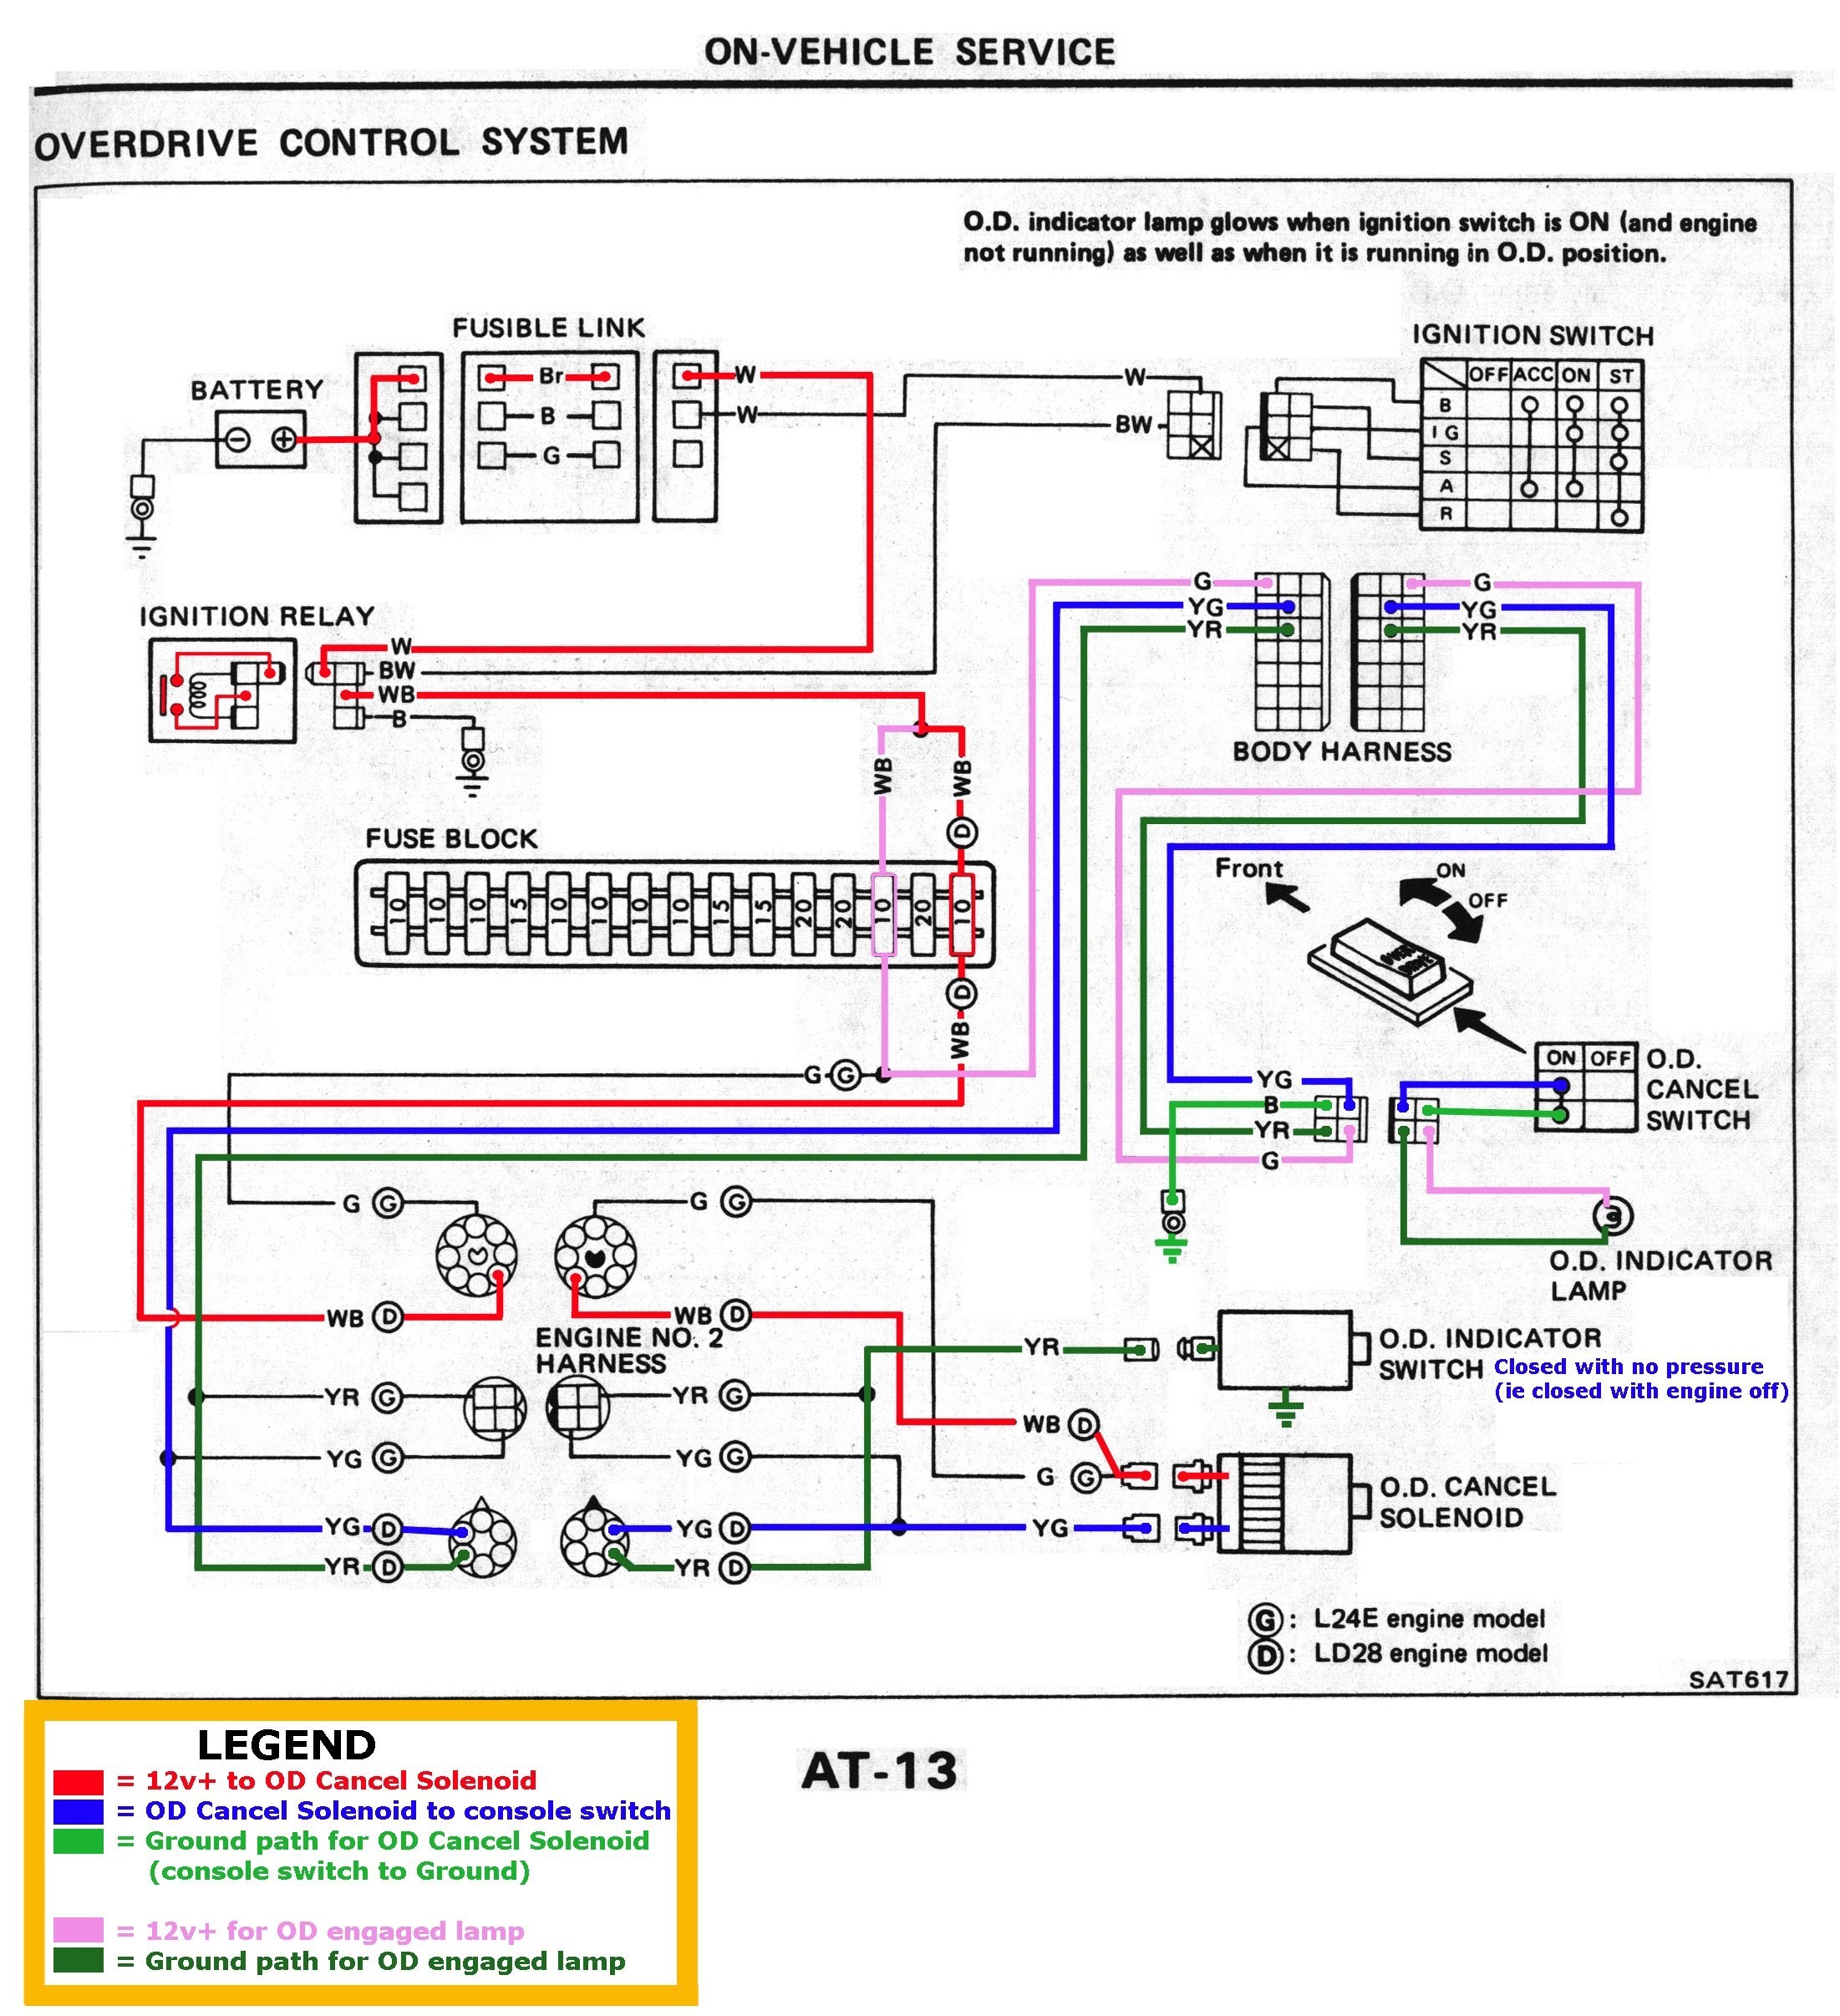 Wiring Diagram for Furnace Gas Valve Valid Gas solenoid Valve Wiring Diagram Fresh Gas Valve Wiring